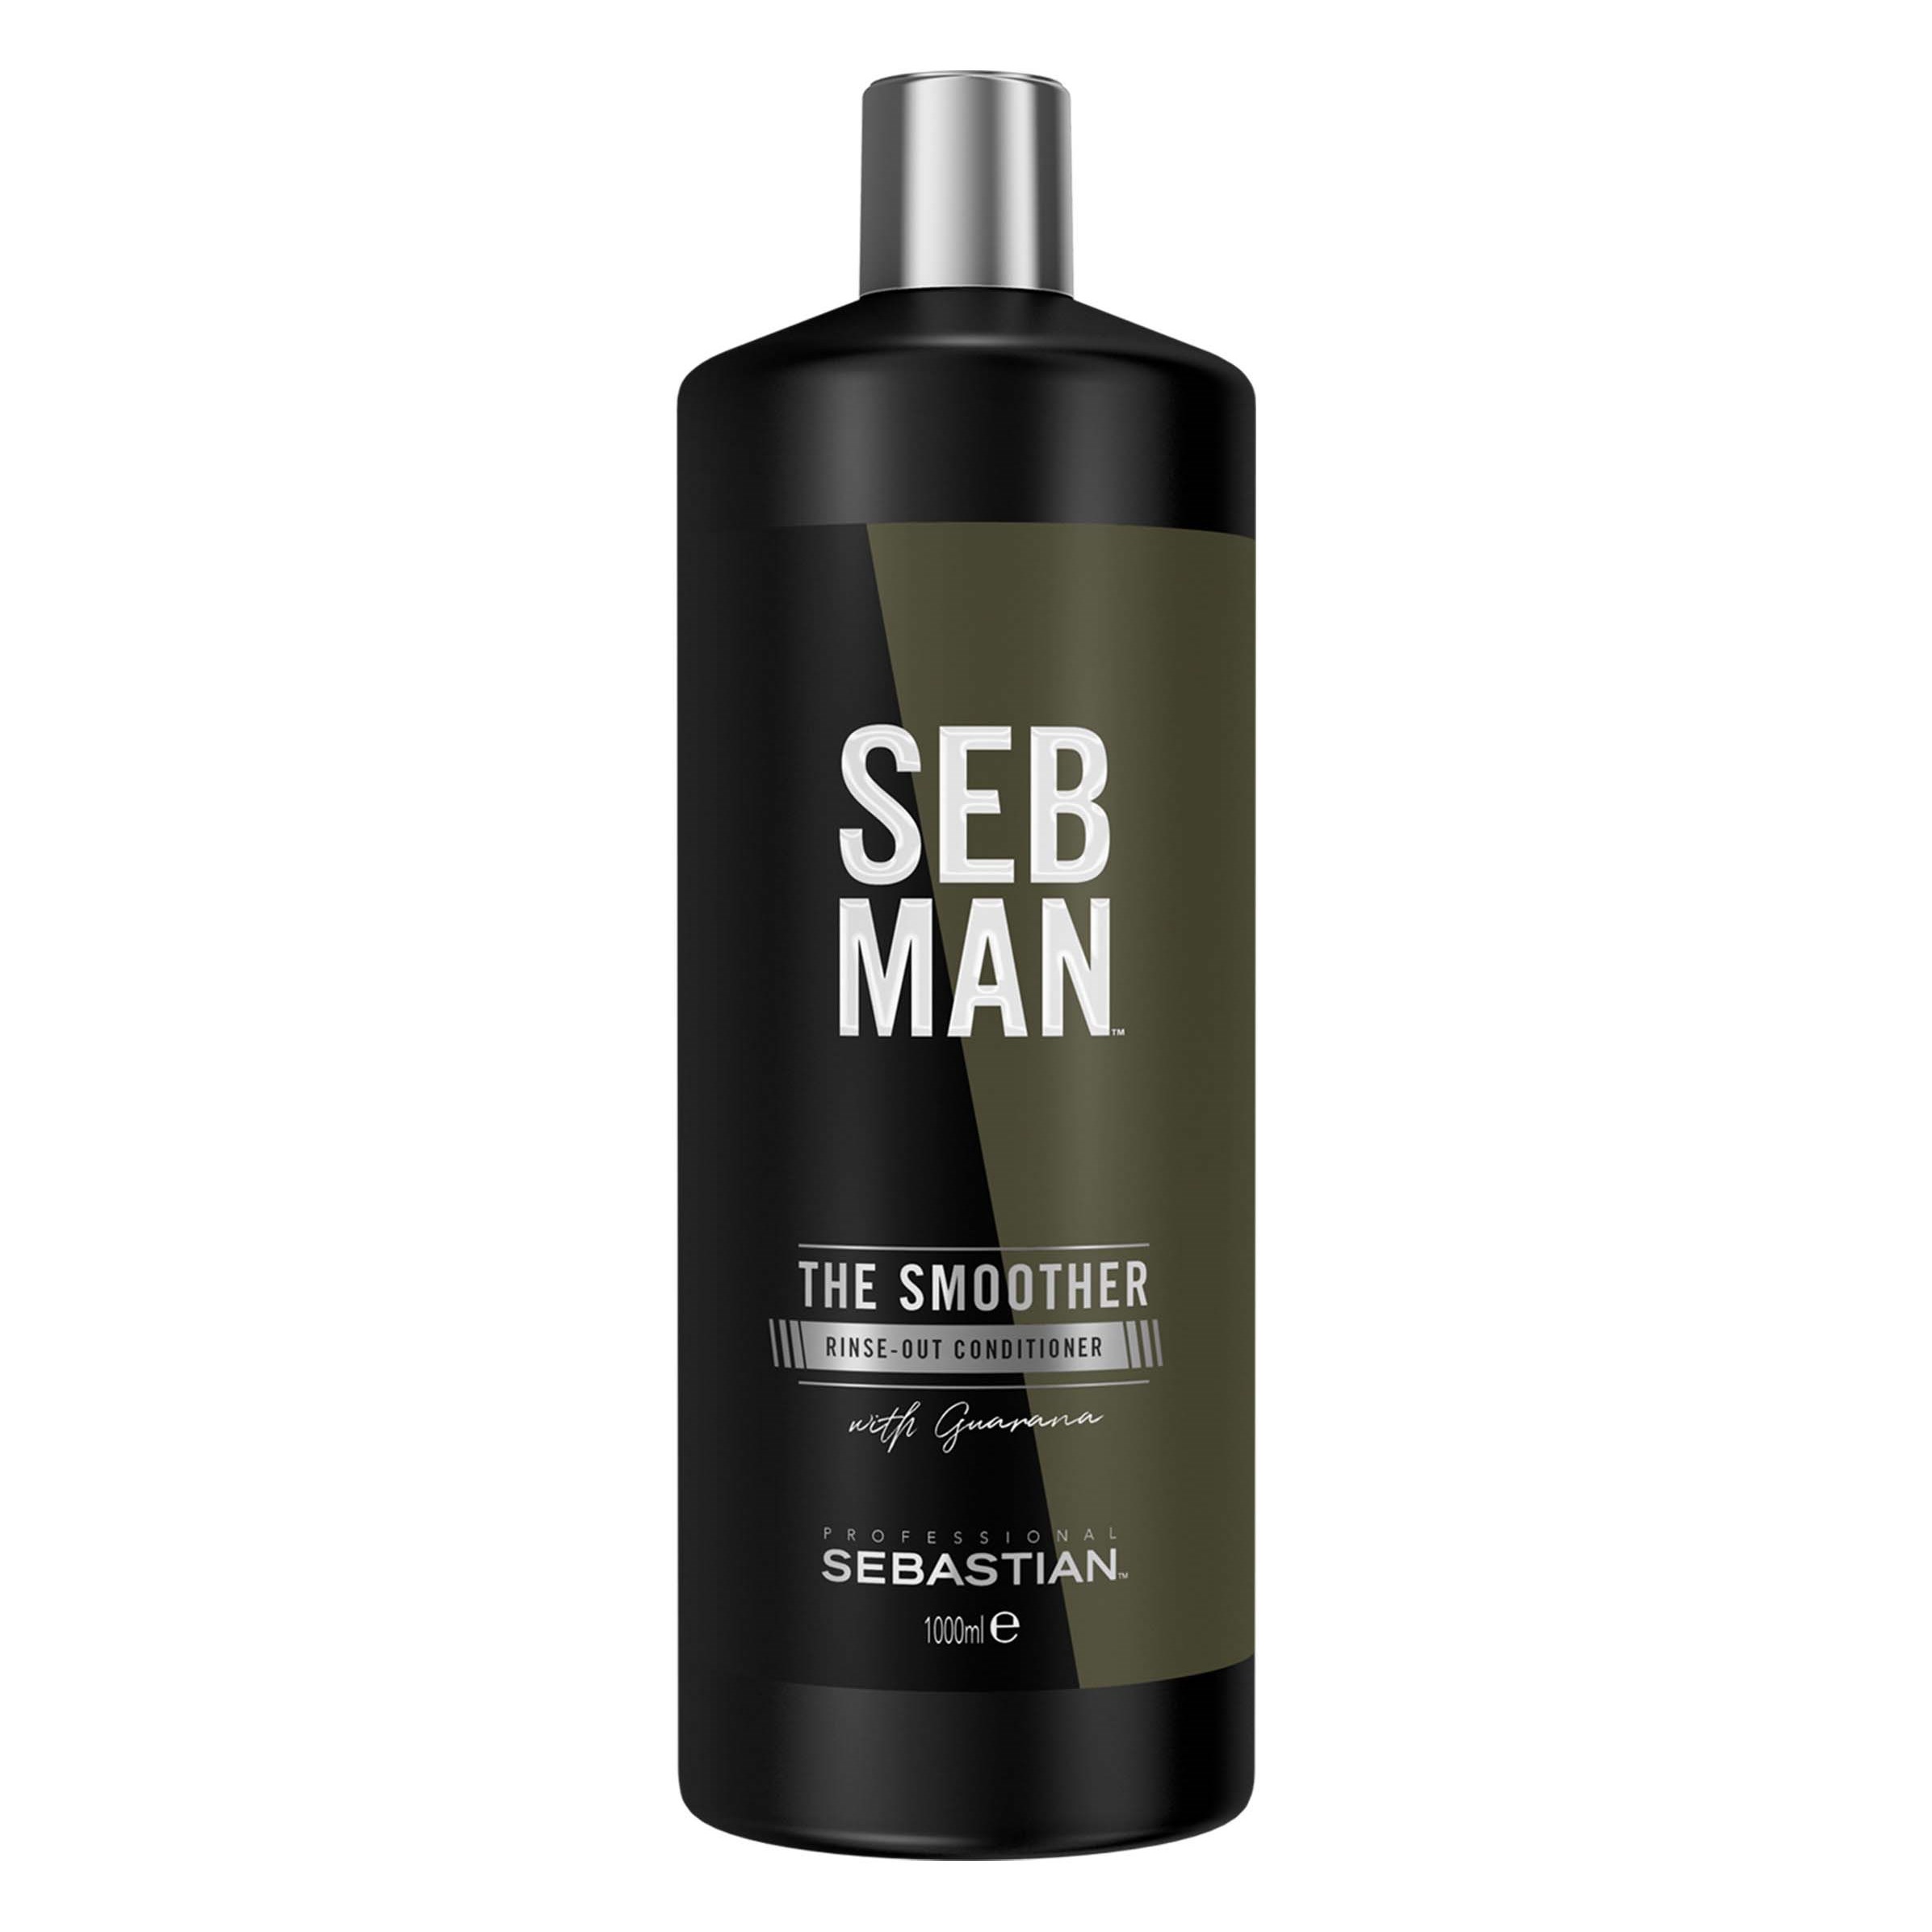 Läs mer om SEB MAN The Smoother Rinse out Conditioner 1000 ml